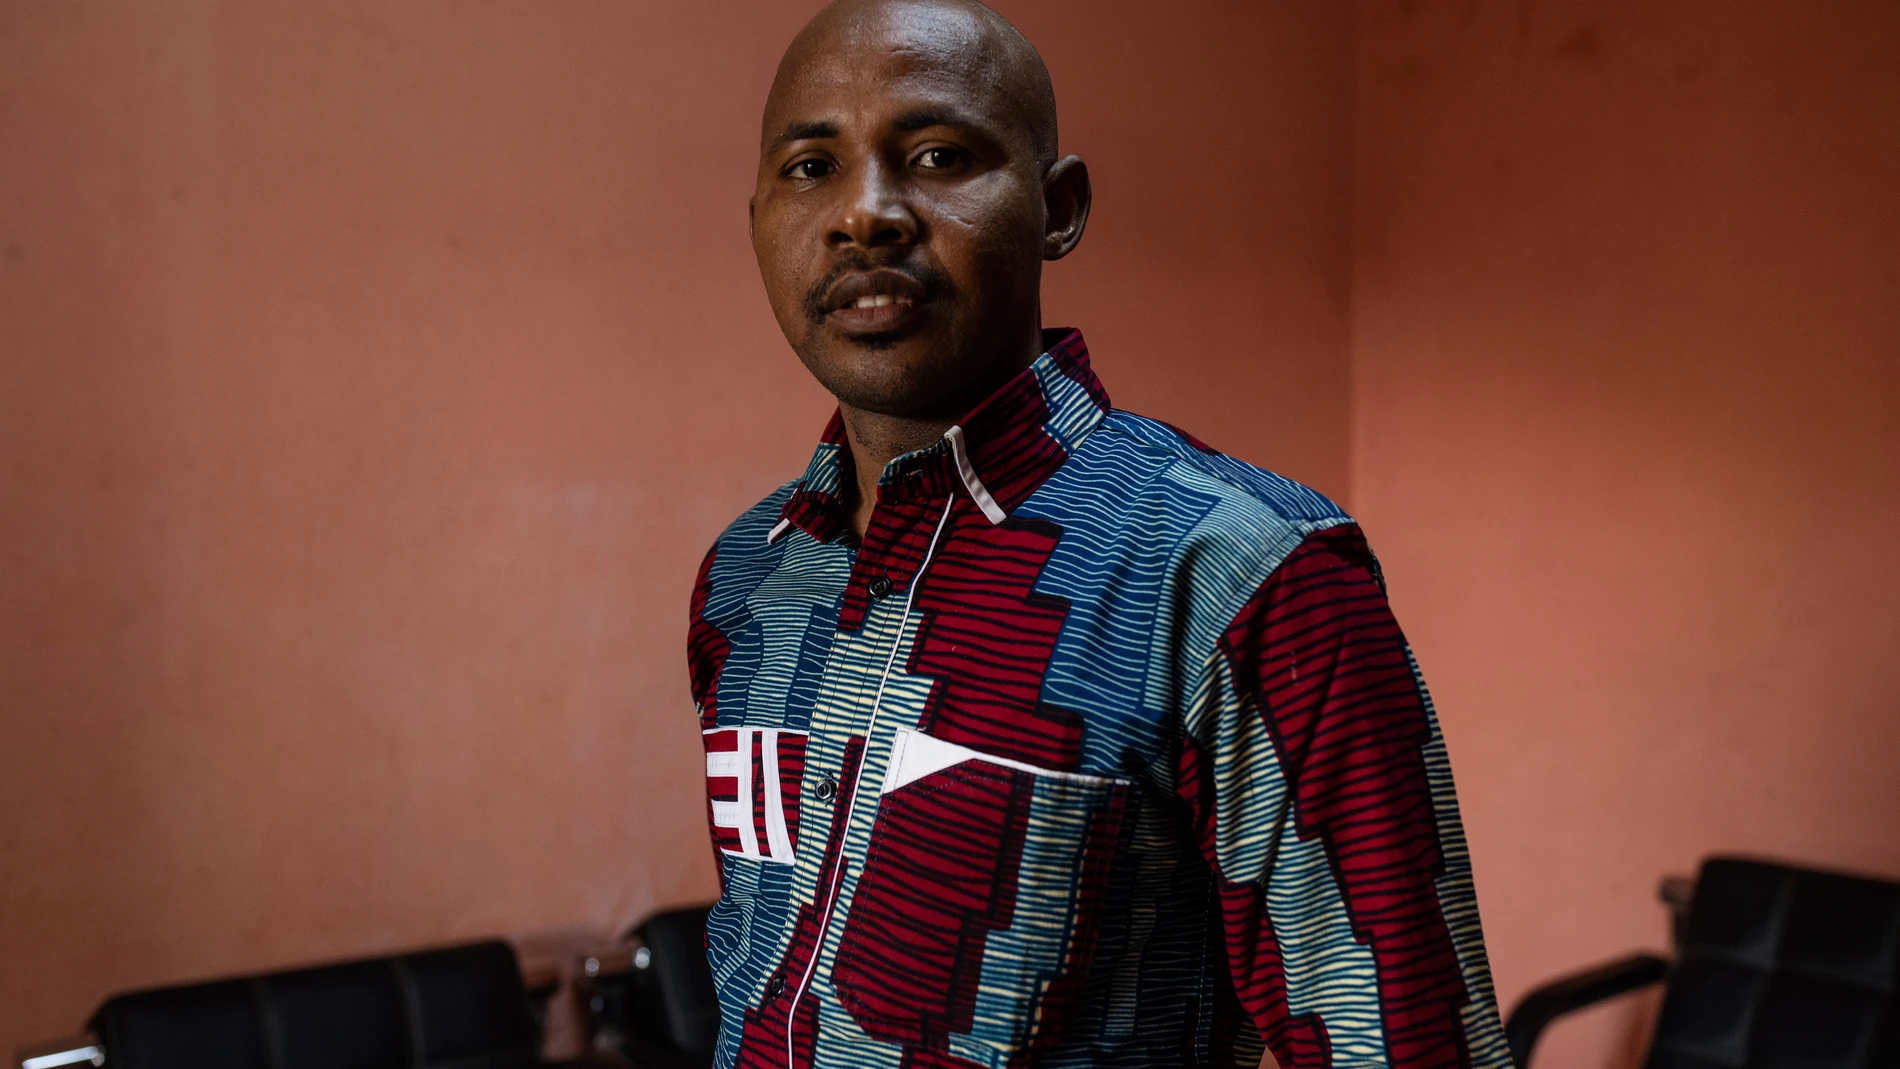 FILE - Daouda Diallo, one of Burkina Faso's most prominent human rights defenders poses for a photograph, in Ouagadougou, Burkina Faso, Thursday Feb. 3, 2022. Daouda Diallo — who won the Martin Ennals awards for human rights in 2022 — was taken to an unknown location by men who accosted him in the nation's capital city on Friday, Dec. 1, 2023 the local civic group which Diallo founded said in a statement. (AP Photo/Sophie Garcia, File)